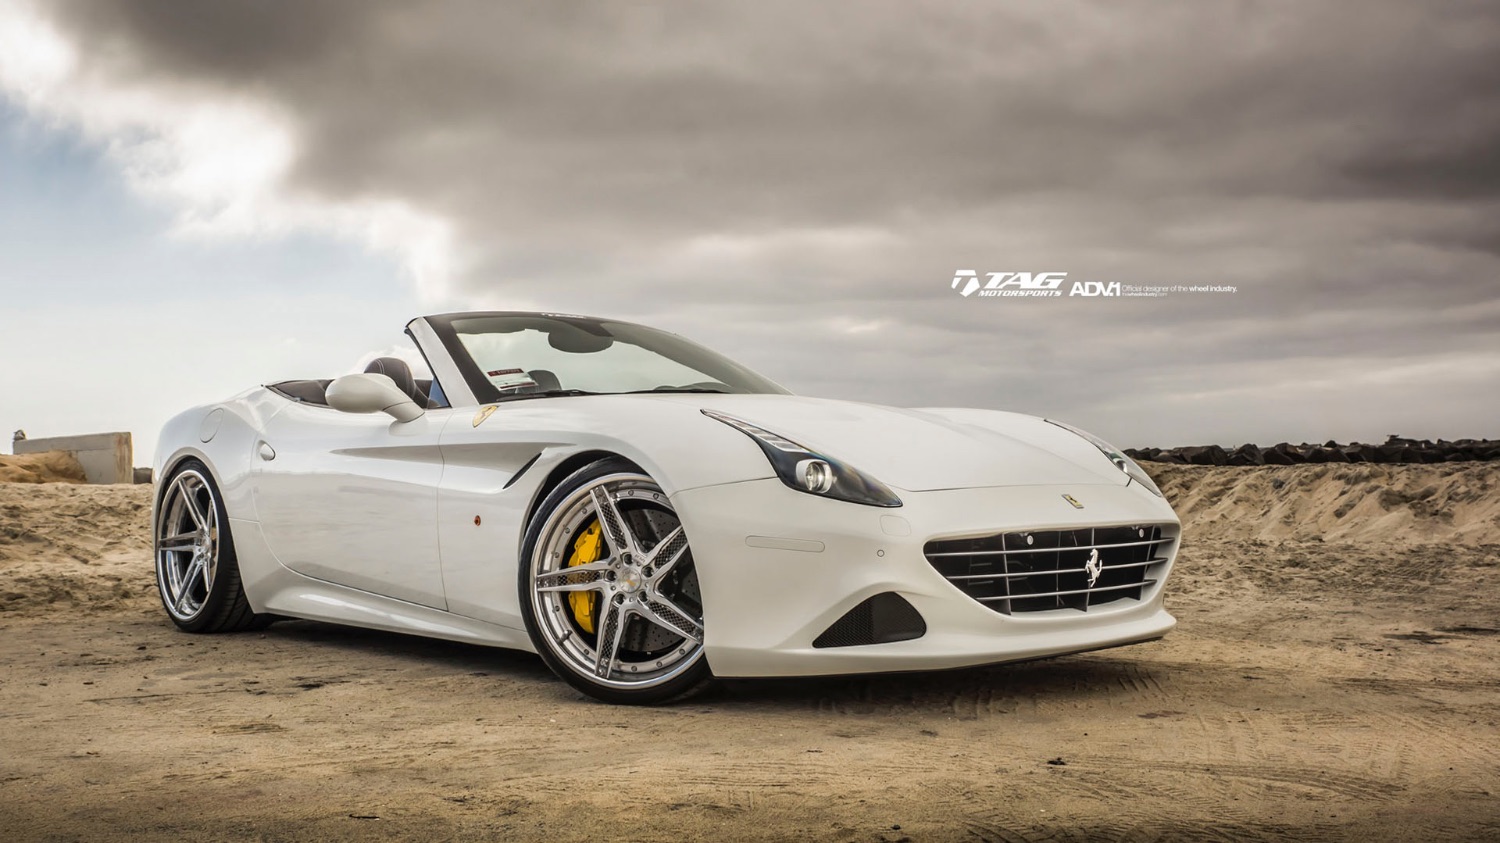 ferrari-california-tag-motorsports-adv05rm-wheels-brushed-stainless-mesh-inserts-fyt